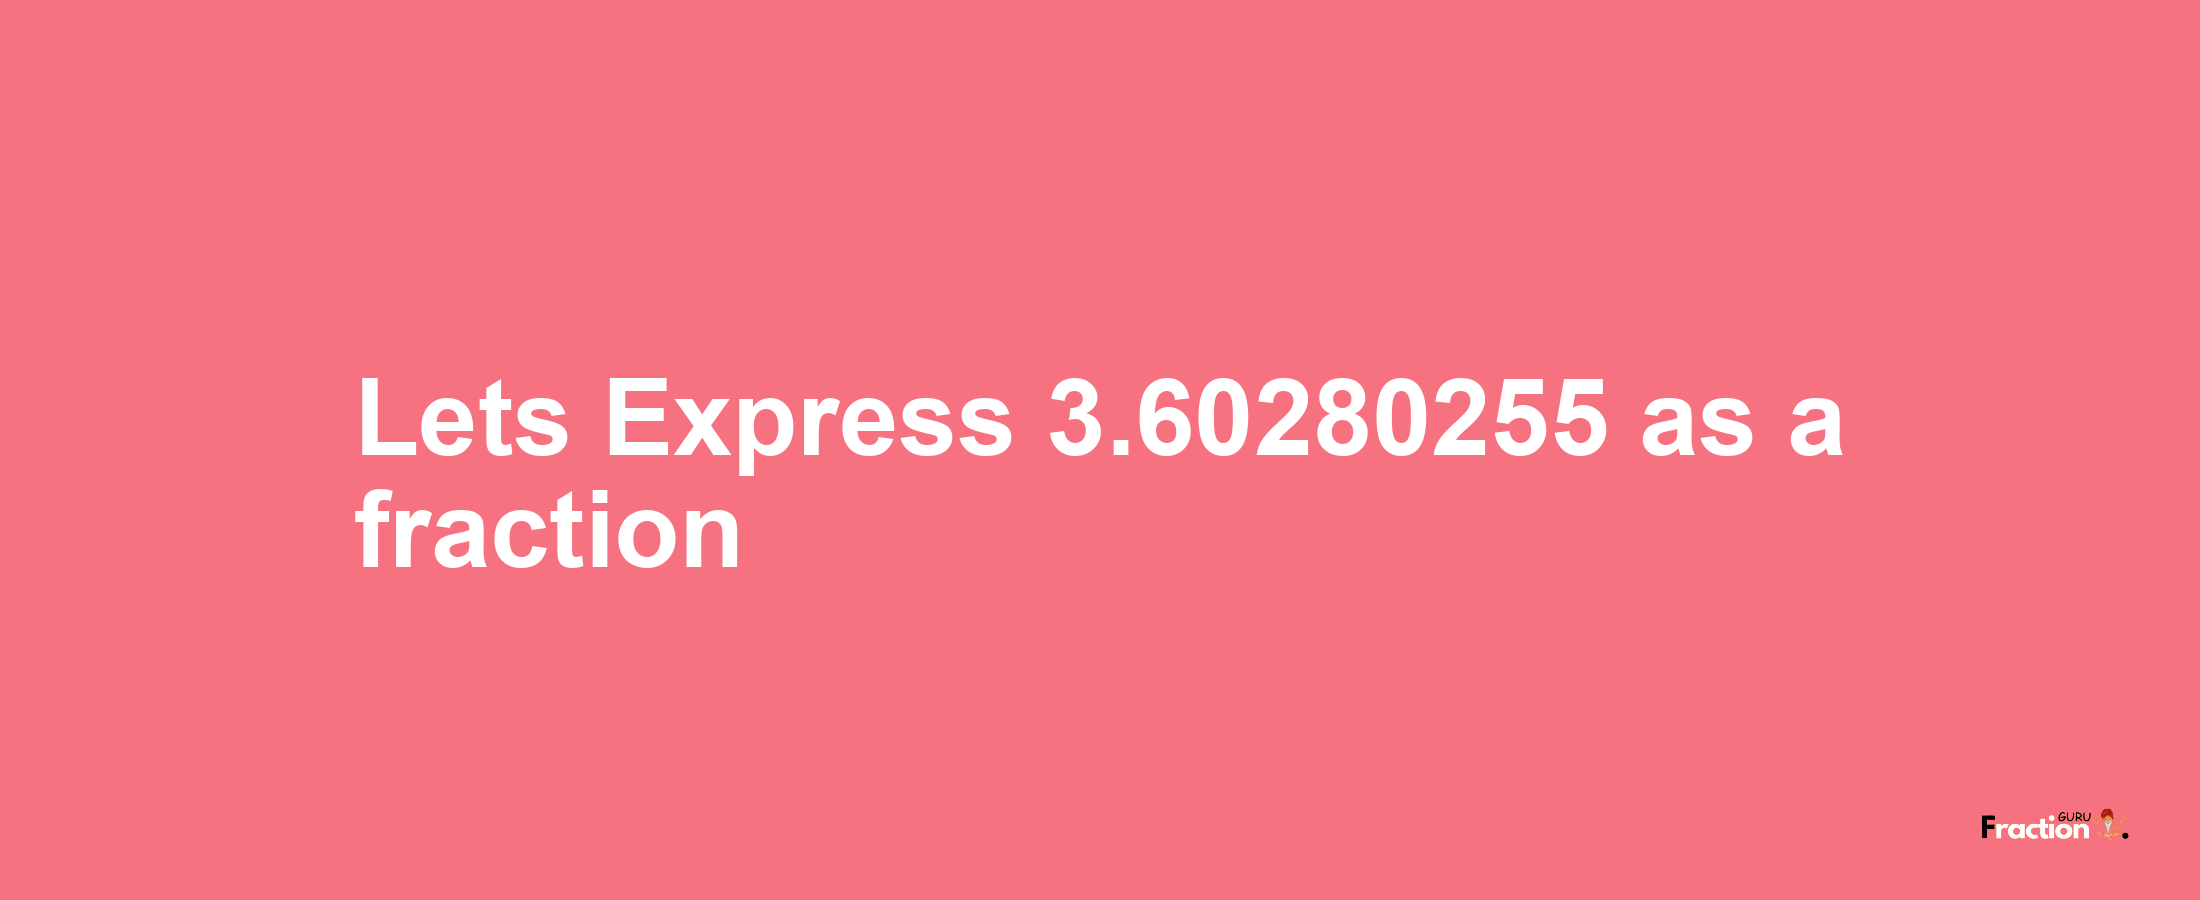 Lets Express 3.60280255 as afraction